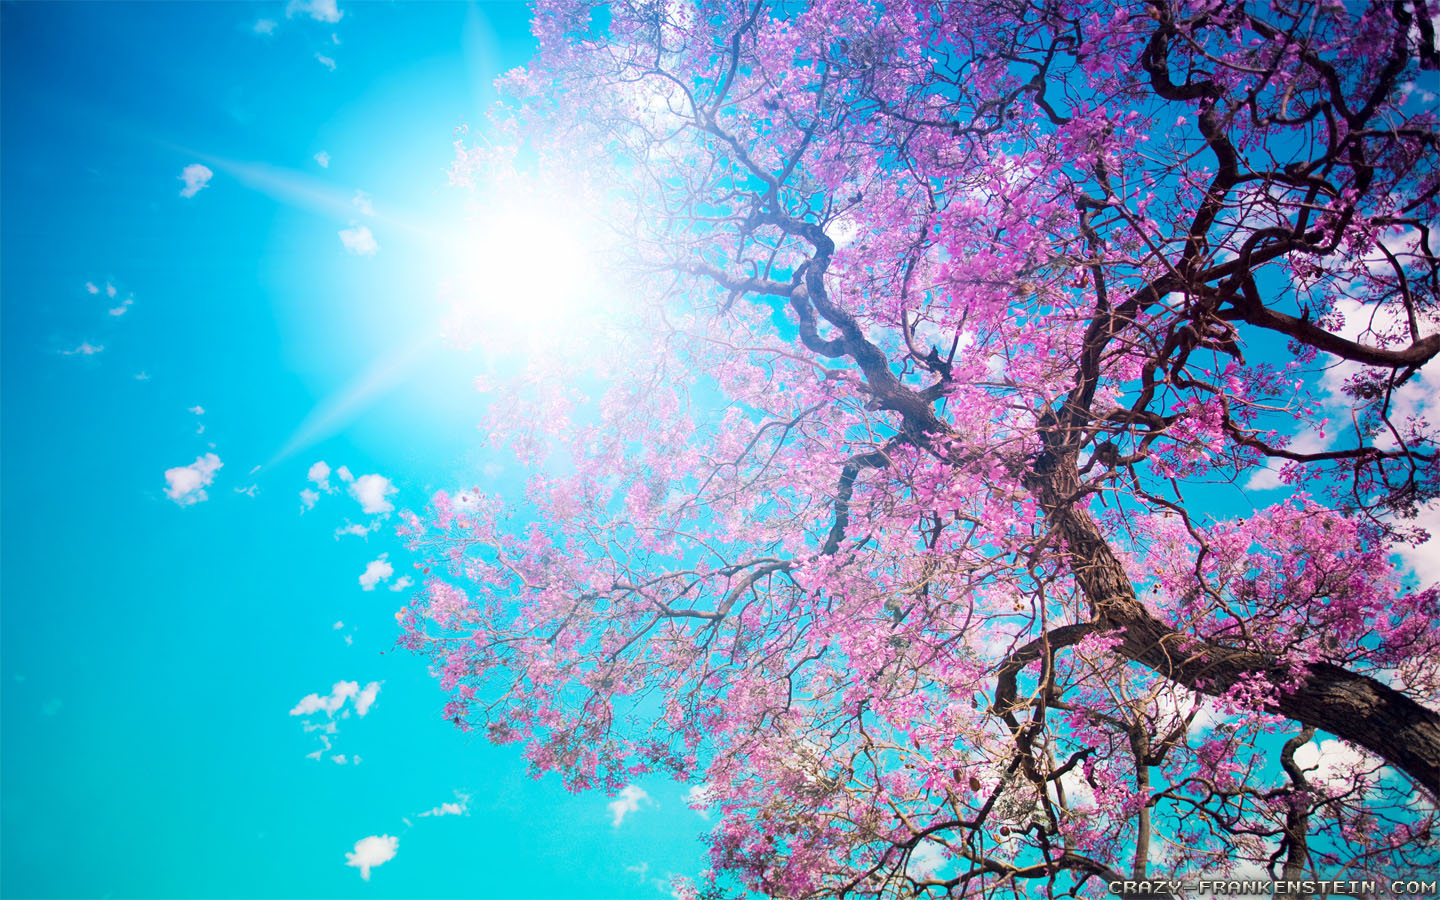 HD wallpaper 2013 Beautiful Spring Nature Wallpapers Backgrounds by